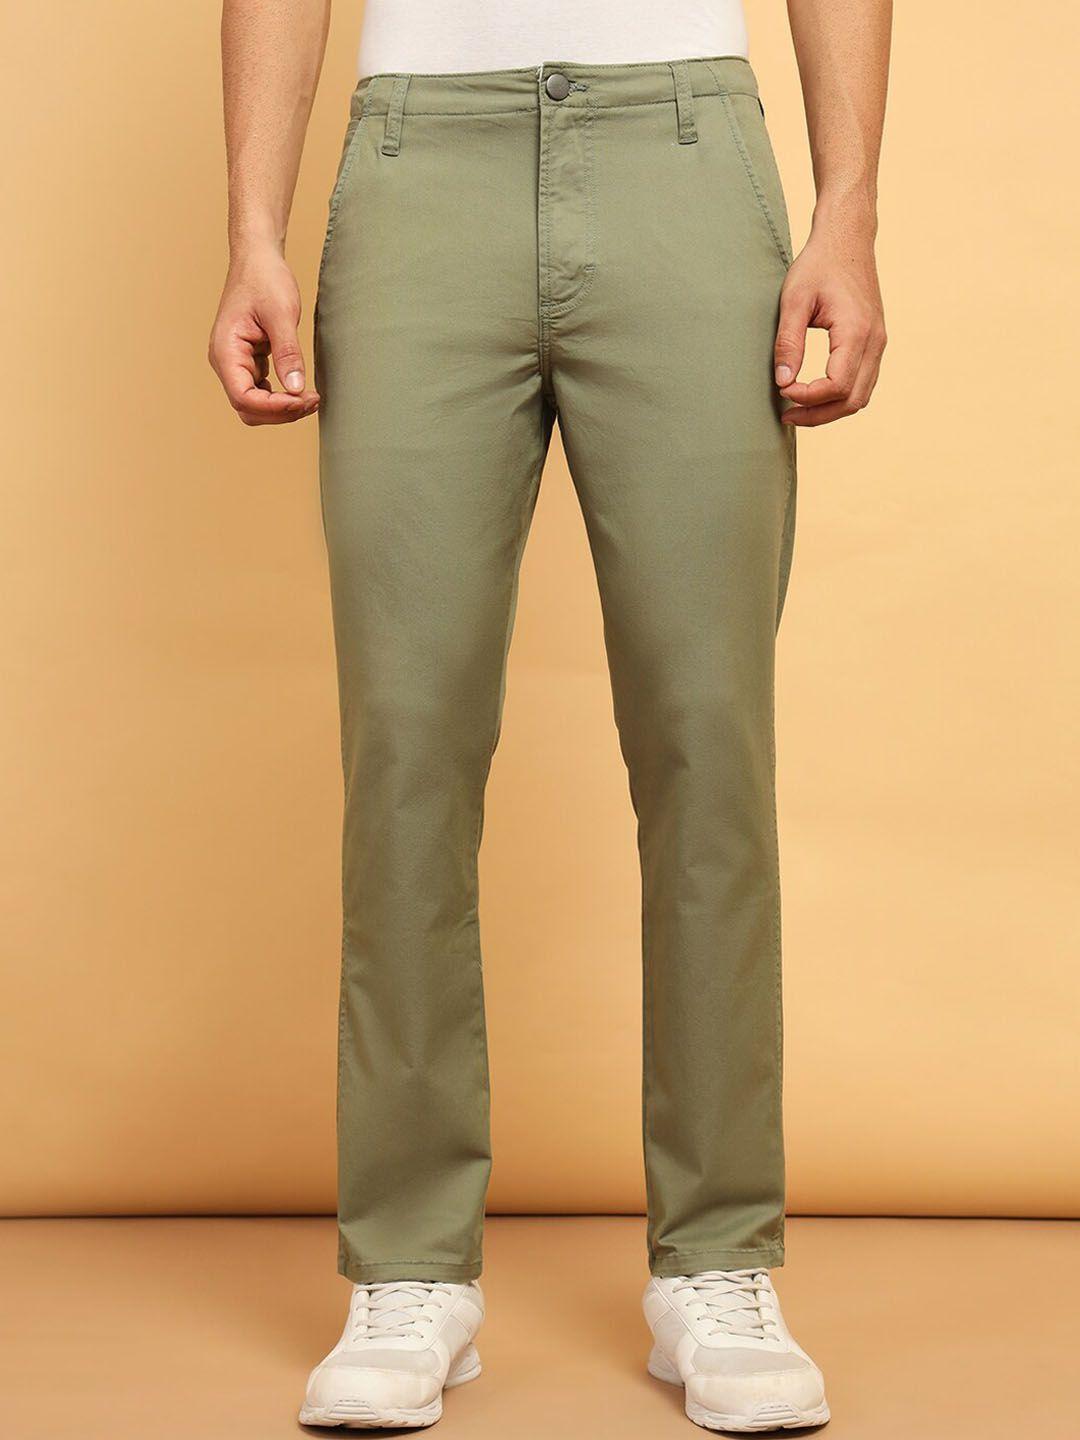 wrangler-men-flat-front-mid-rise-chinos-trousers